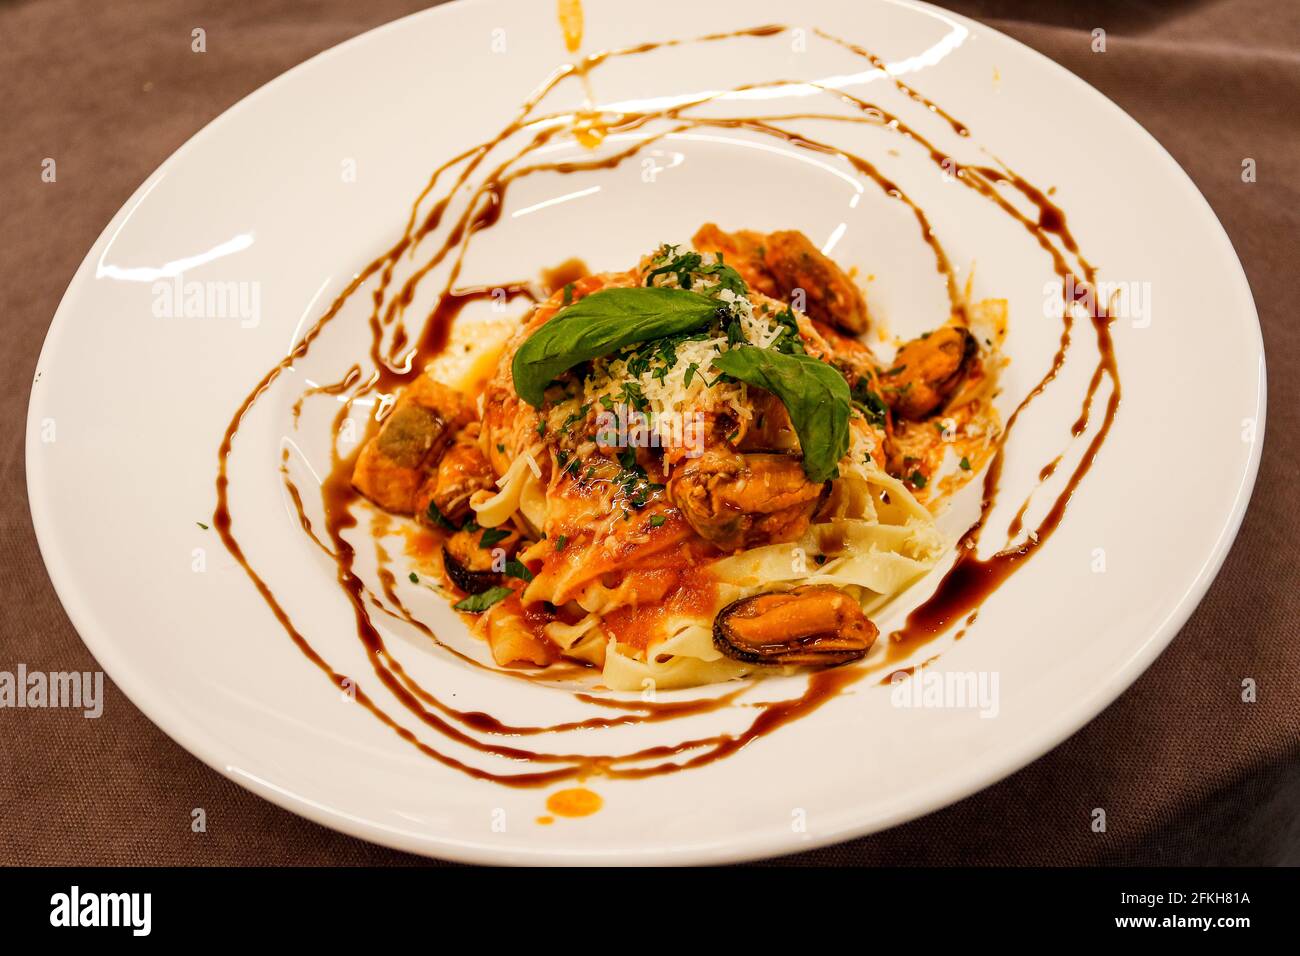 Pasta with mussels, sauce-poured serving on the white plate.  Stock Photo